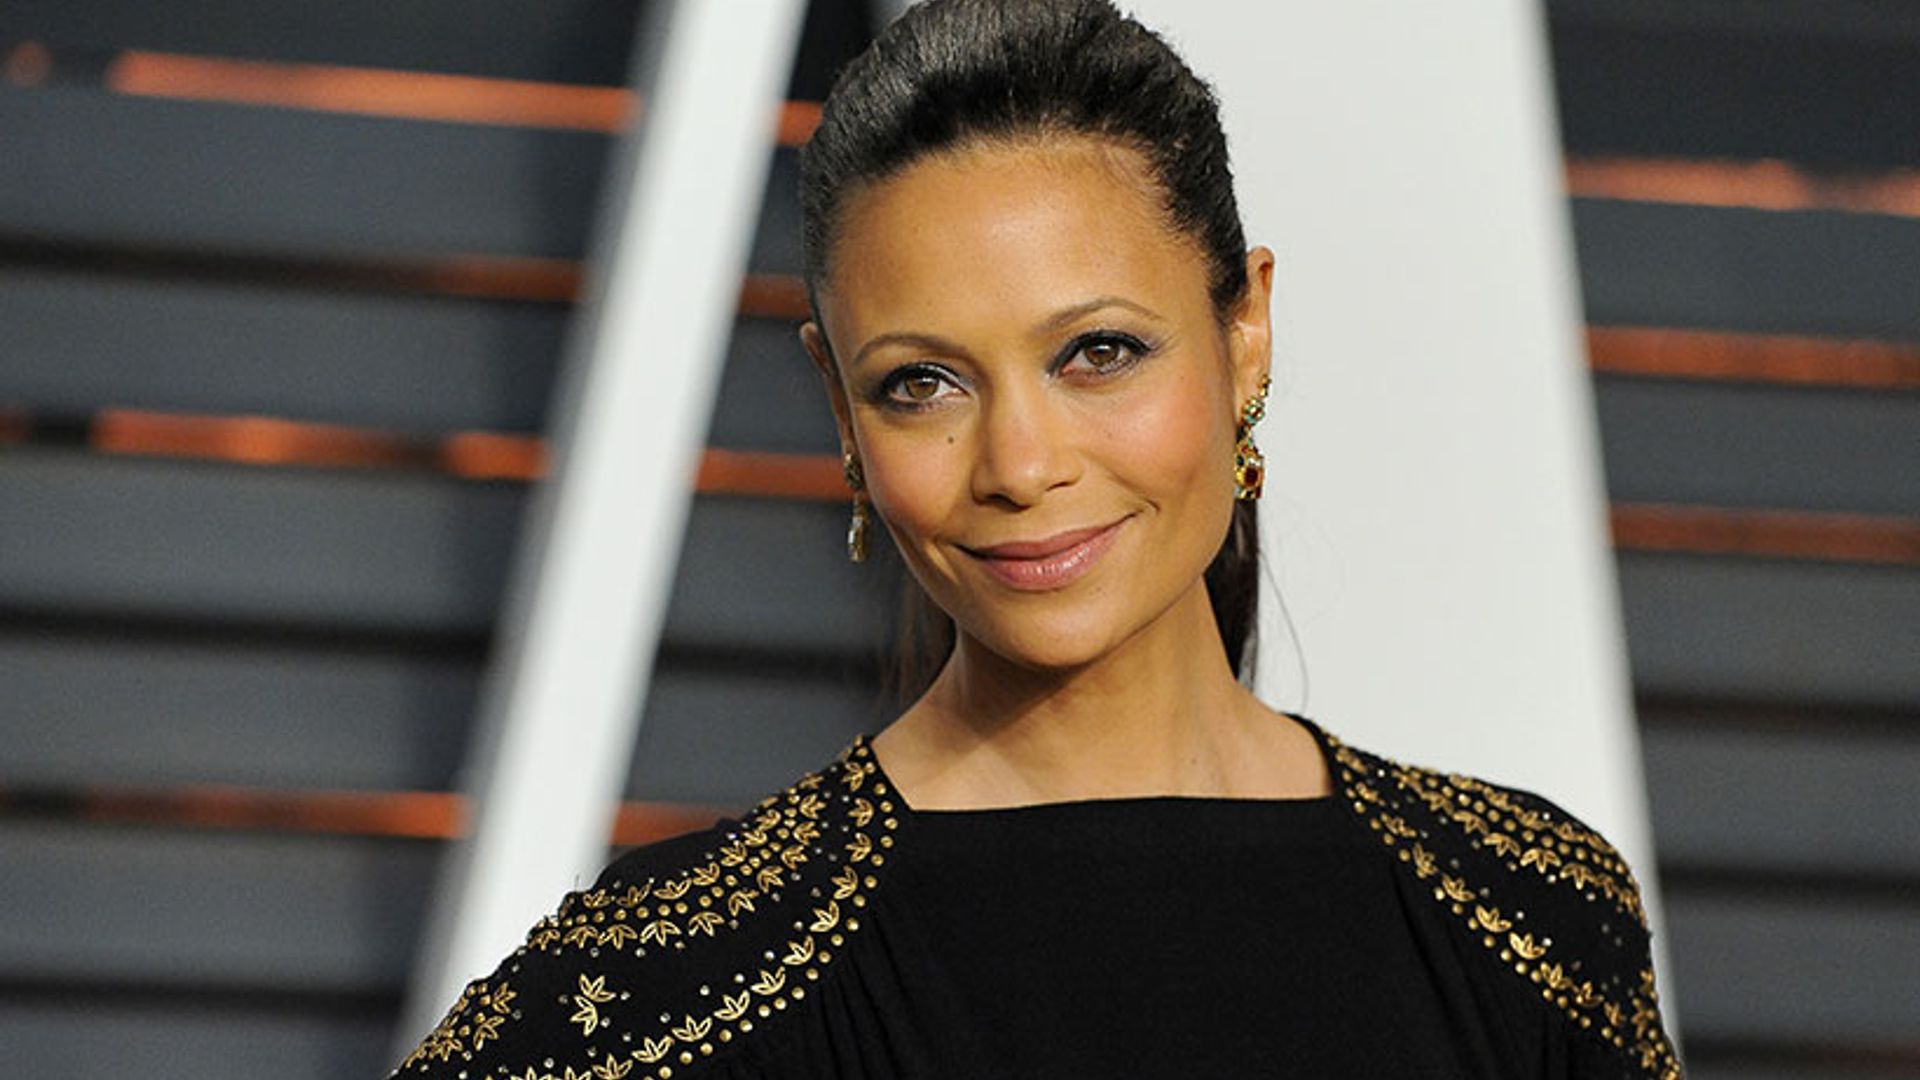 Thandie Newton reveals Victoria Beckham mistook her for another actress - find out who!